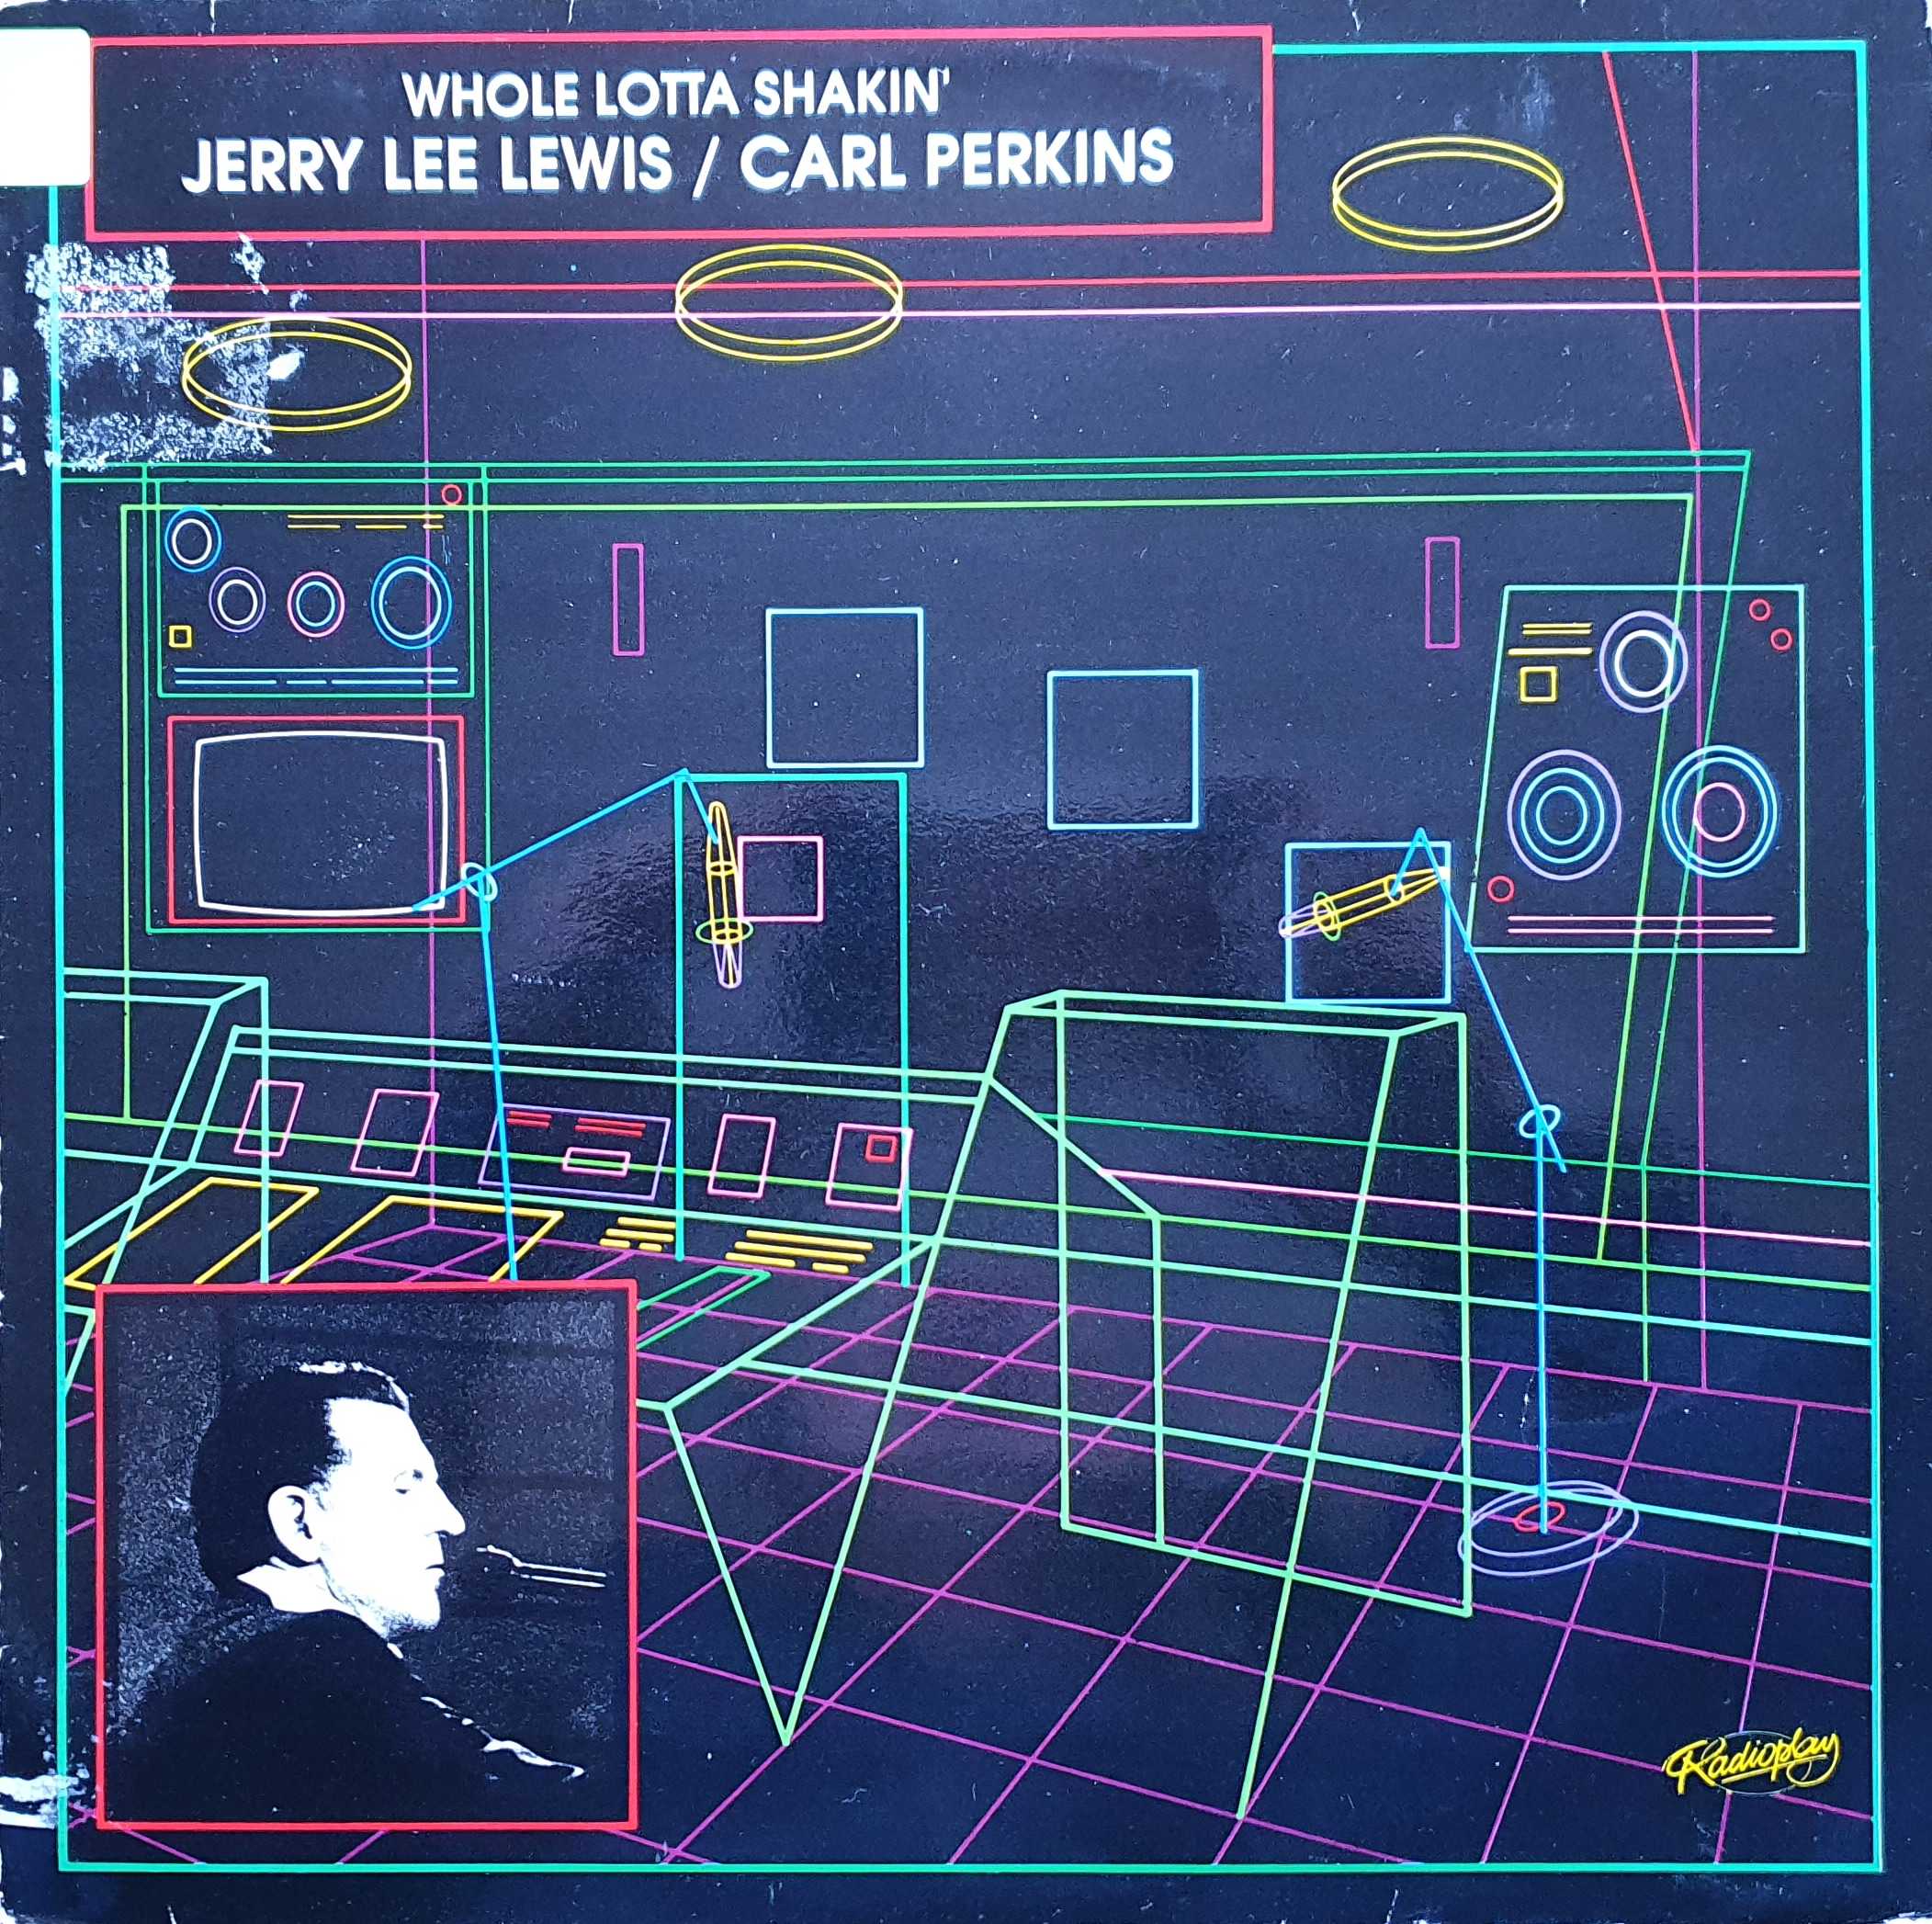 Picture of TAIR 88008 Whole lotta shakin' by artist Jerry Lew Lewis / Carl Perkins from the BBC albums - Records and Tapes library